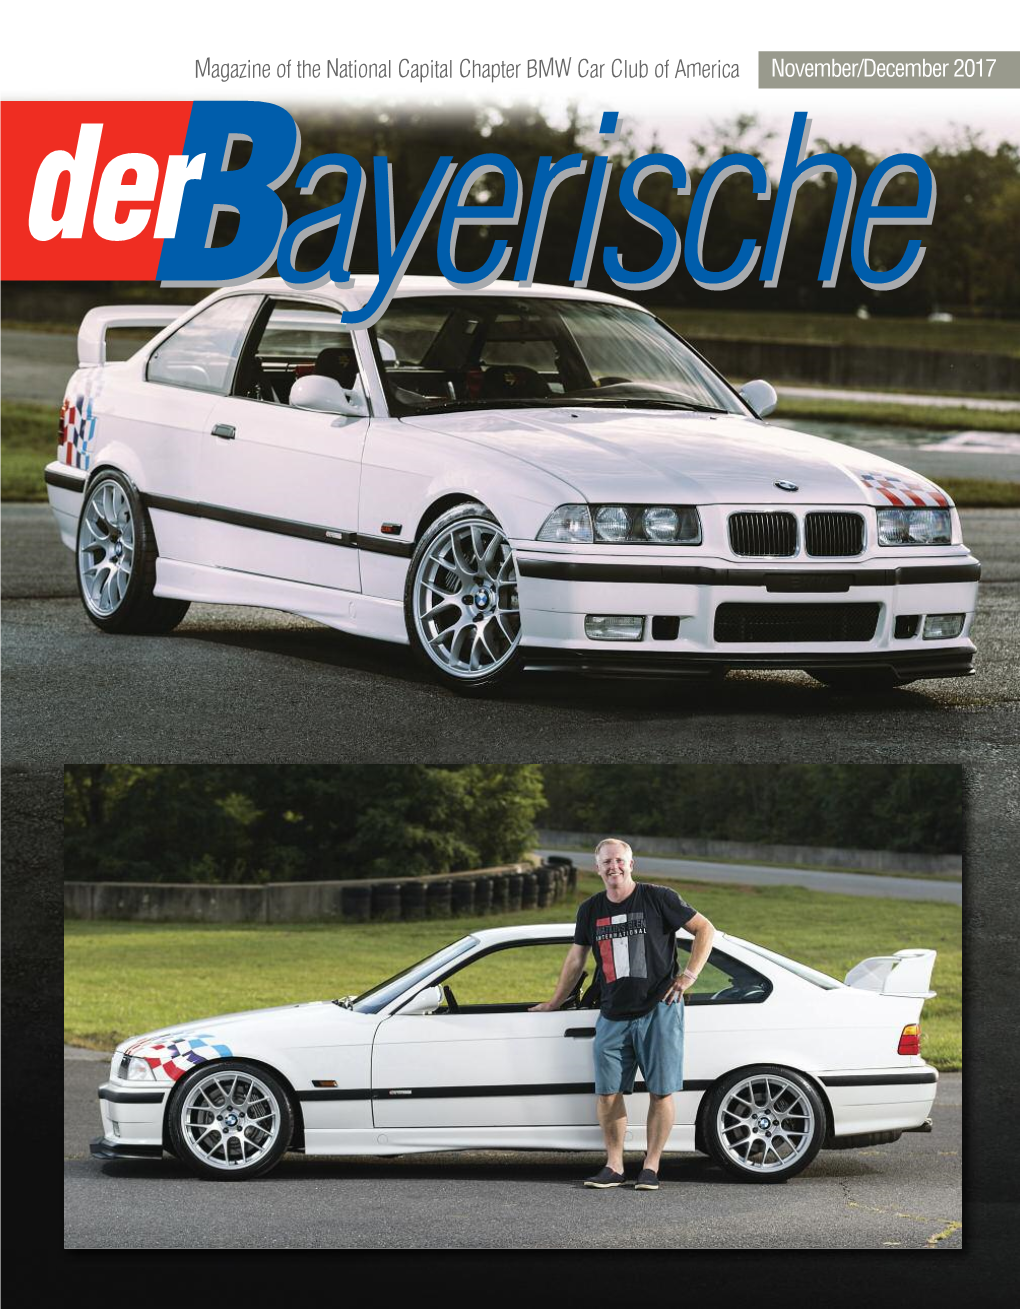 Magazine of the National Capital Chapter BMW Car Club of America November/December 2017